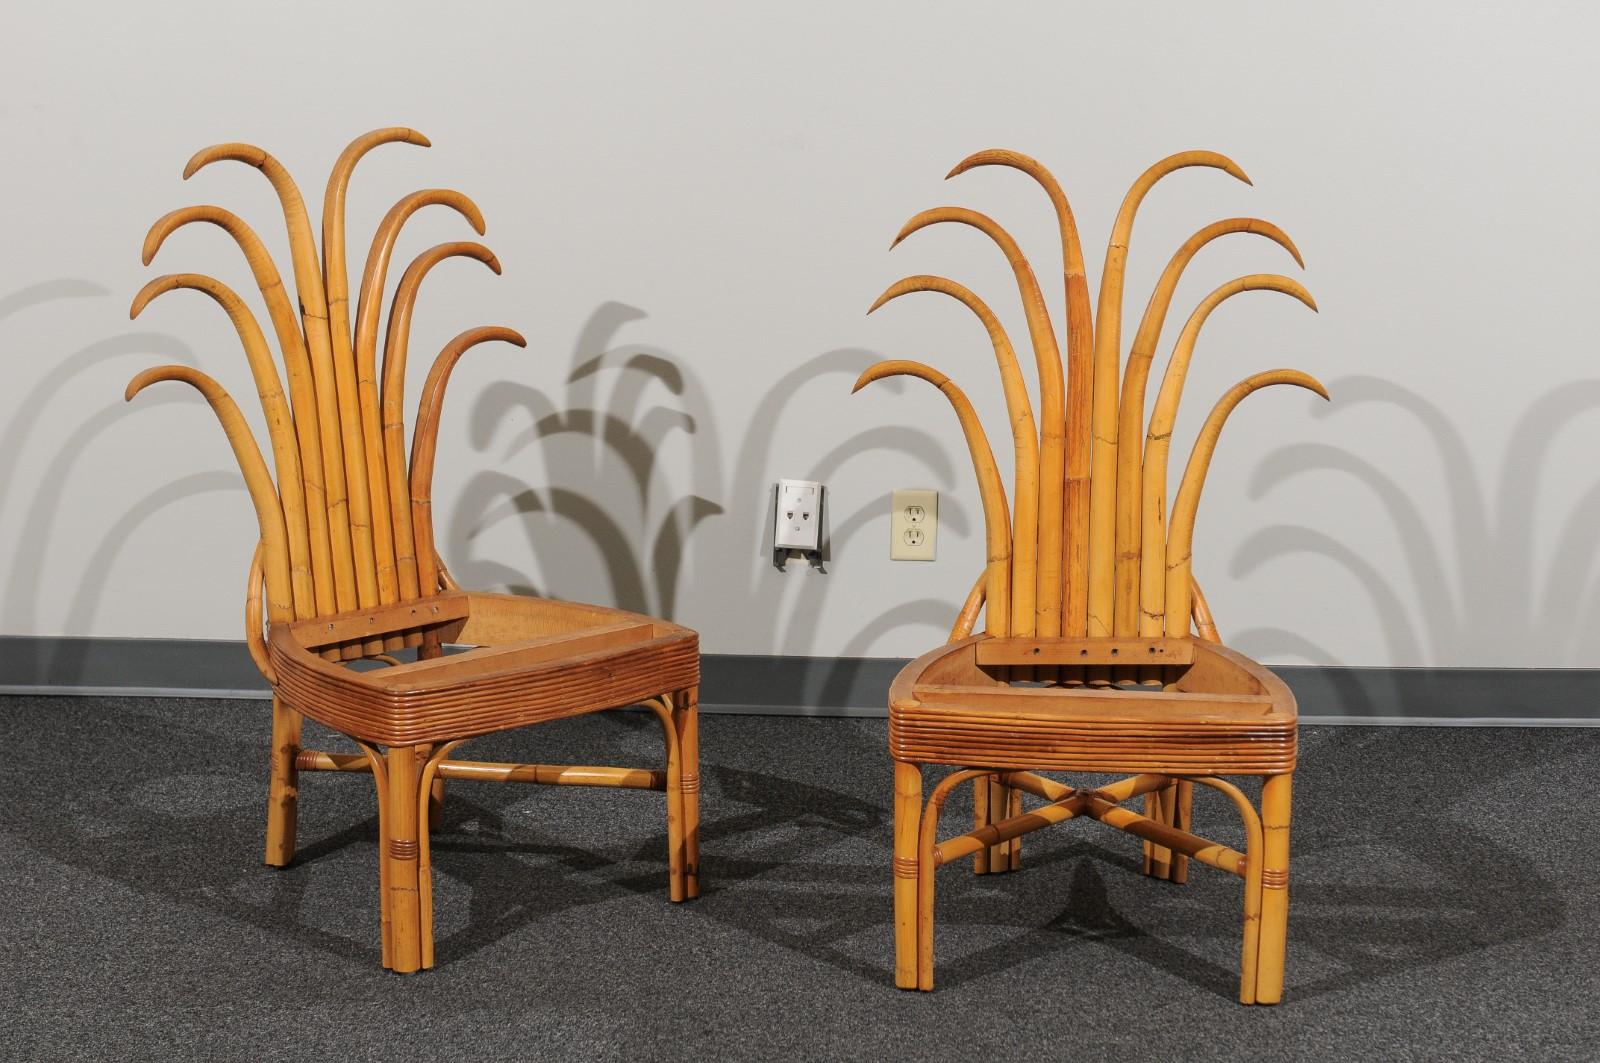 An absolutely majestic set of twelve (12) custom made palm frond style dining chairs, circa 1950. Exceptionally conceived and crafted rattan and hardwood construction with a magnificent back detail. Stout, rigid and comfortable - built for heavy